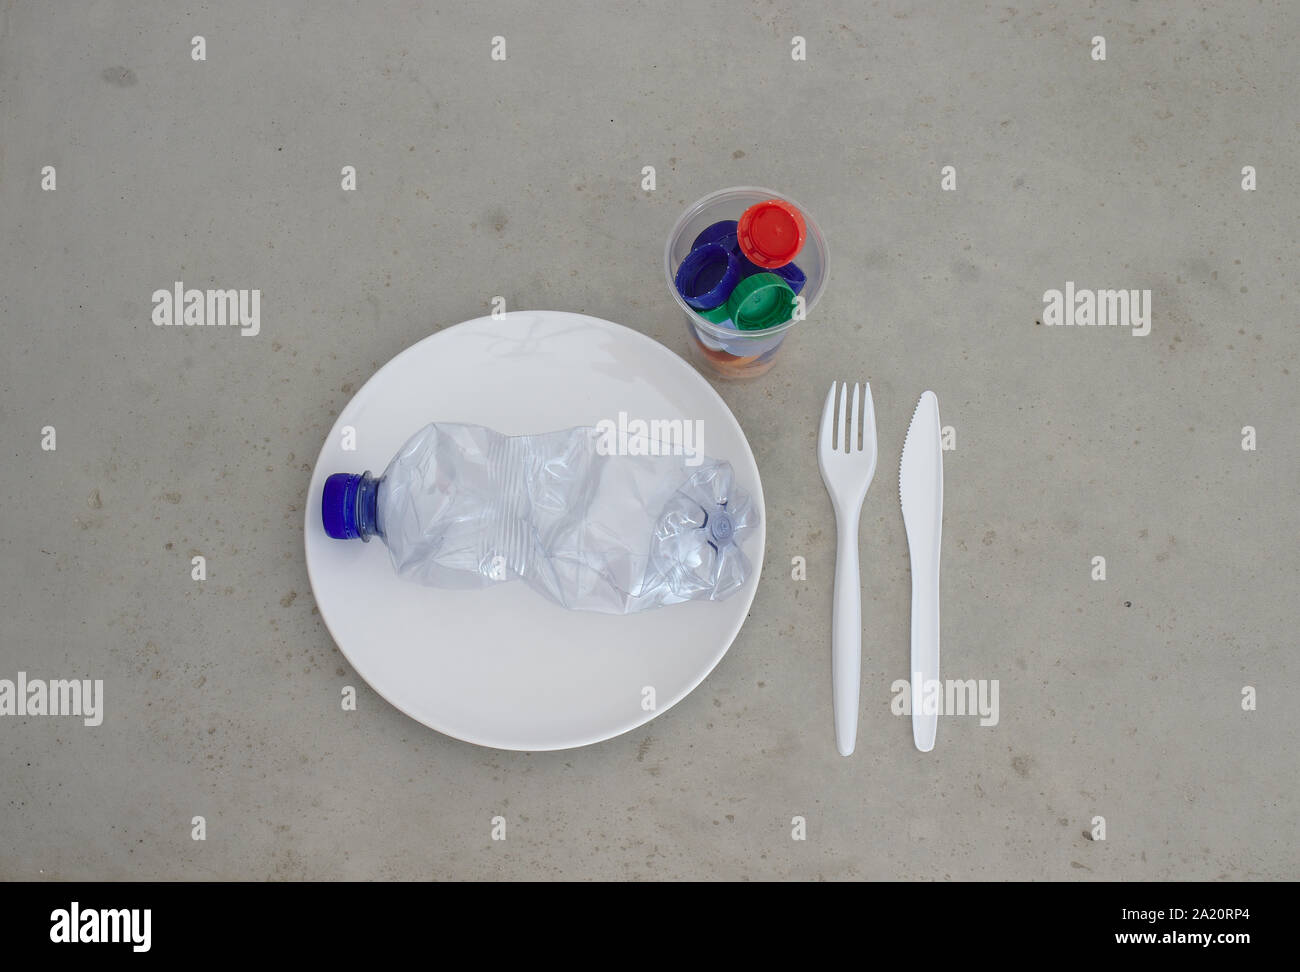 Pet plastic bottle on plate with cutlery and trash filled cup. Showing environment plastic pollution, recycling, zero waste and reusability concepts. Stock Photo